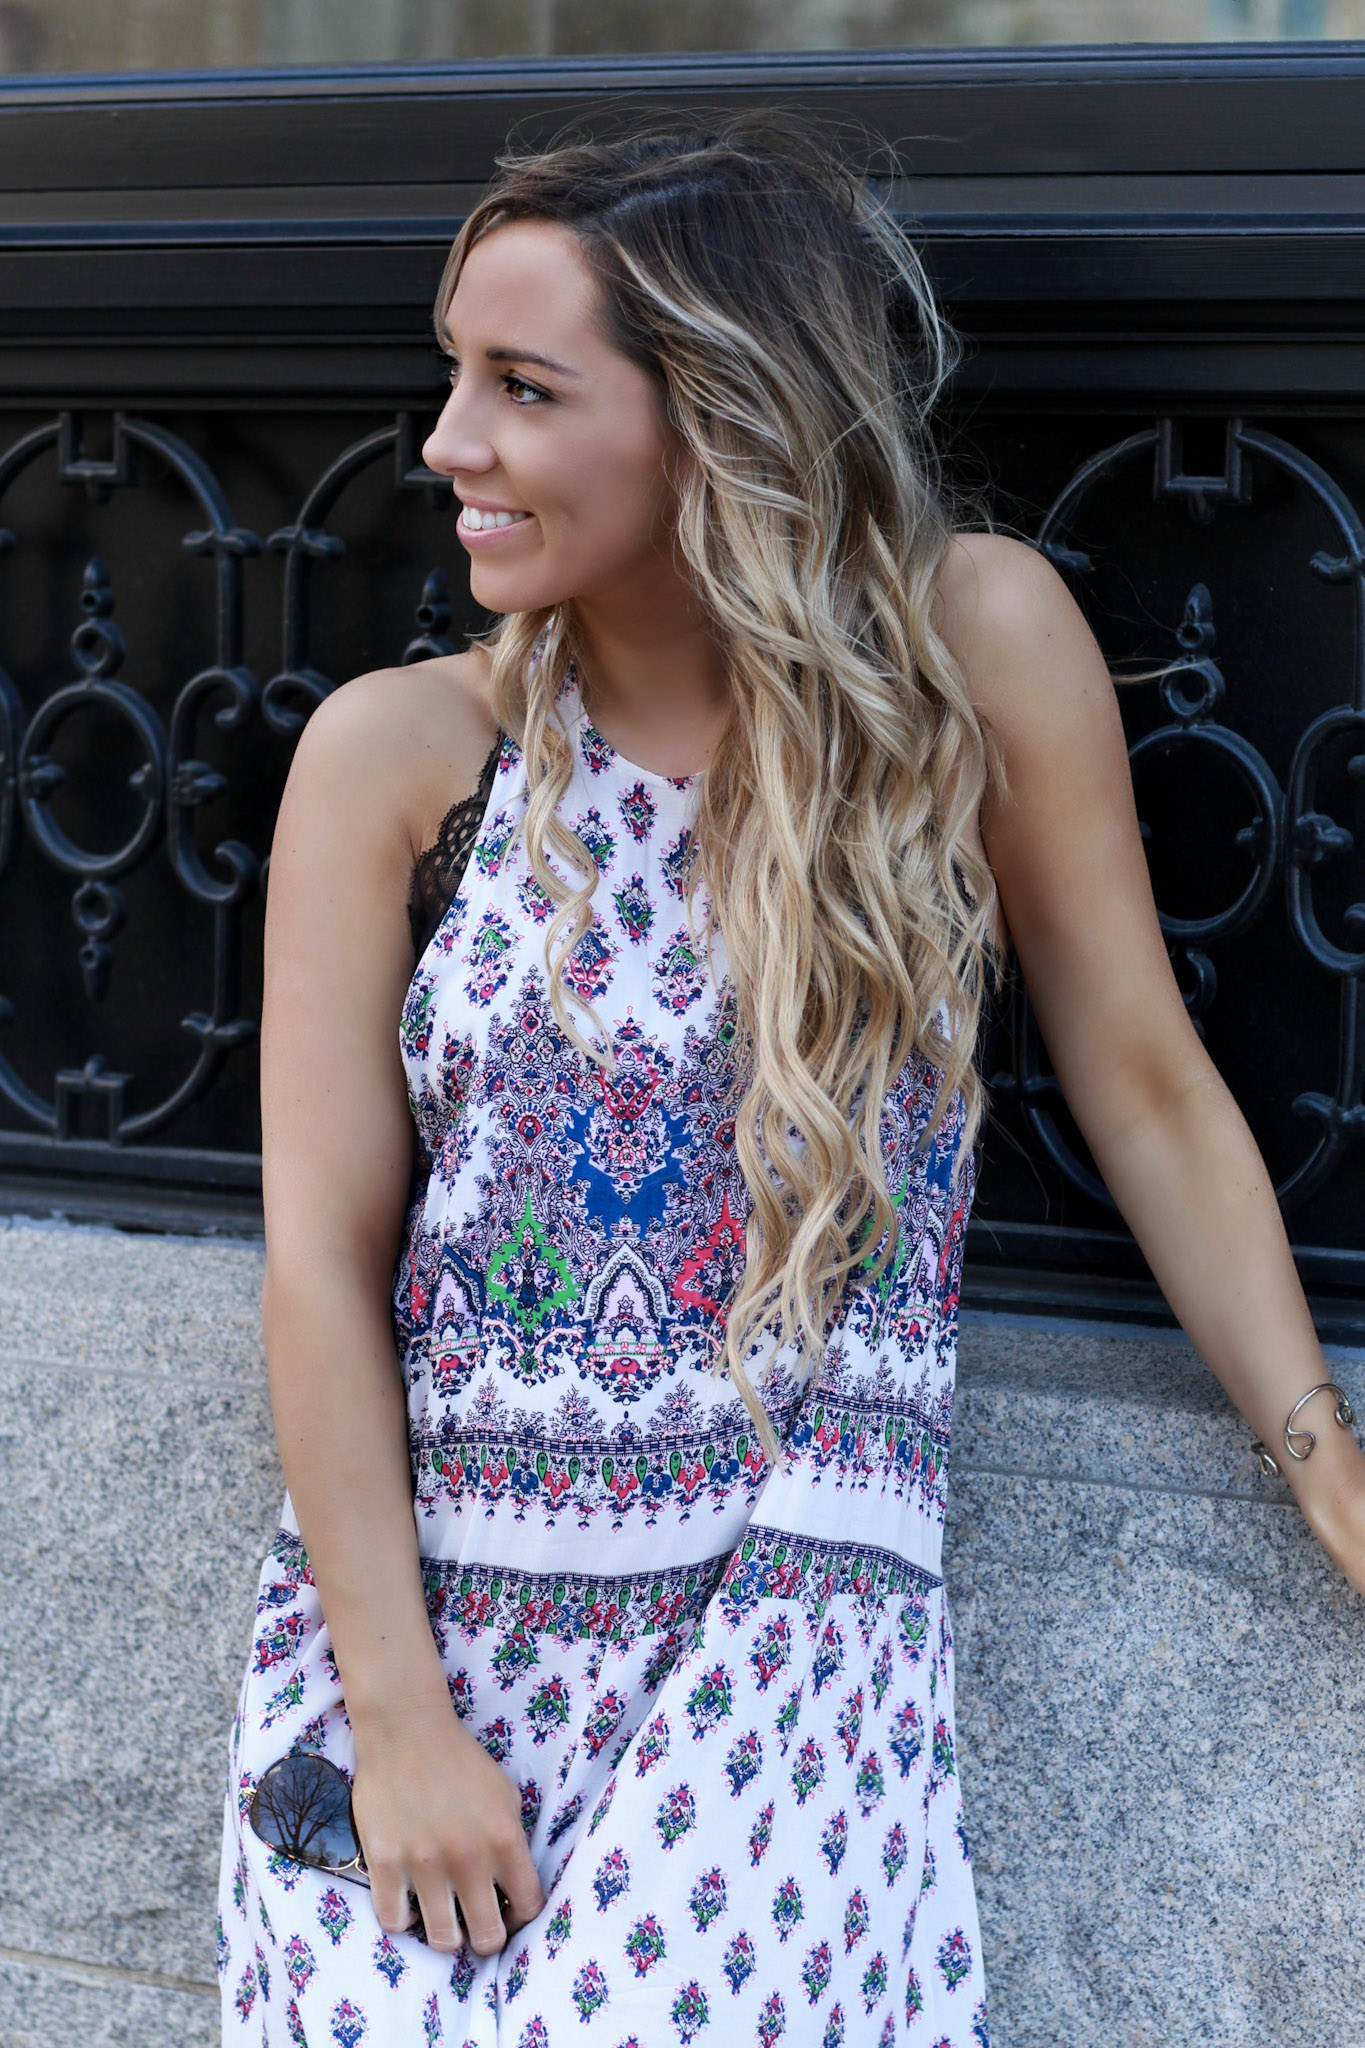 le salty label, maxi dress, boho, printed maxi, gladiators, sam edelman, boho chic, according to blaire, maternity style, pregnancy style, dress the bump, real mom style